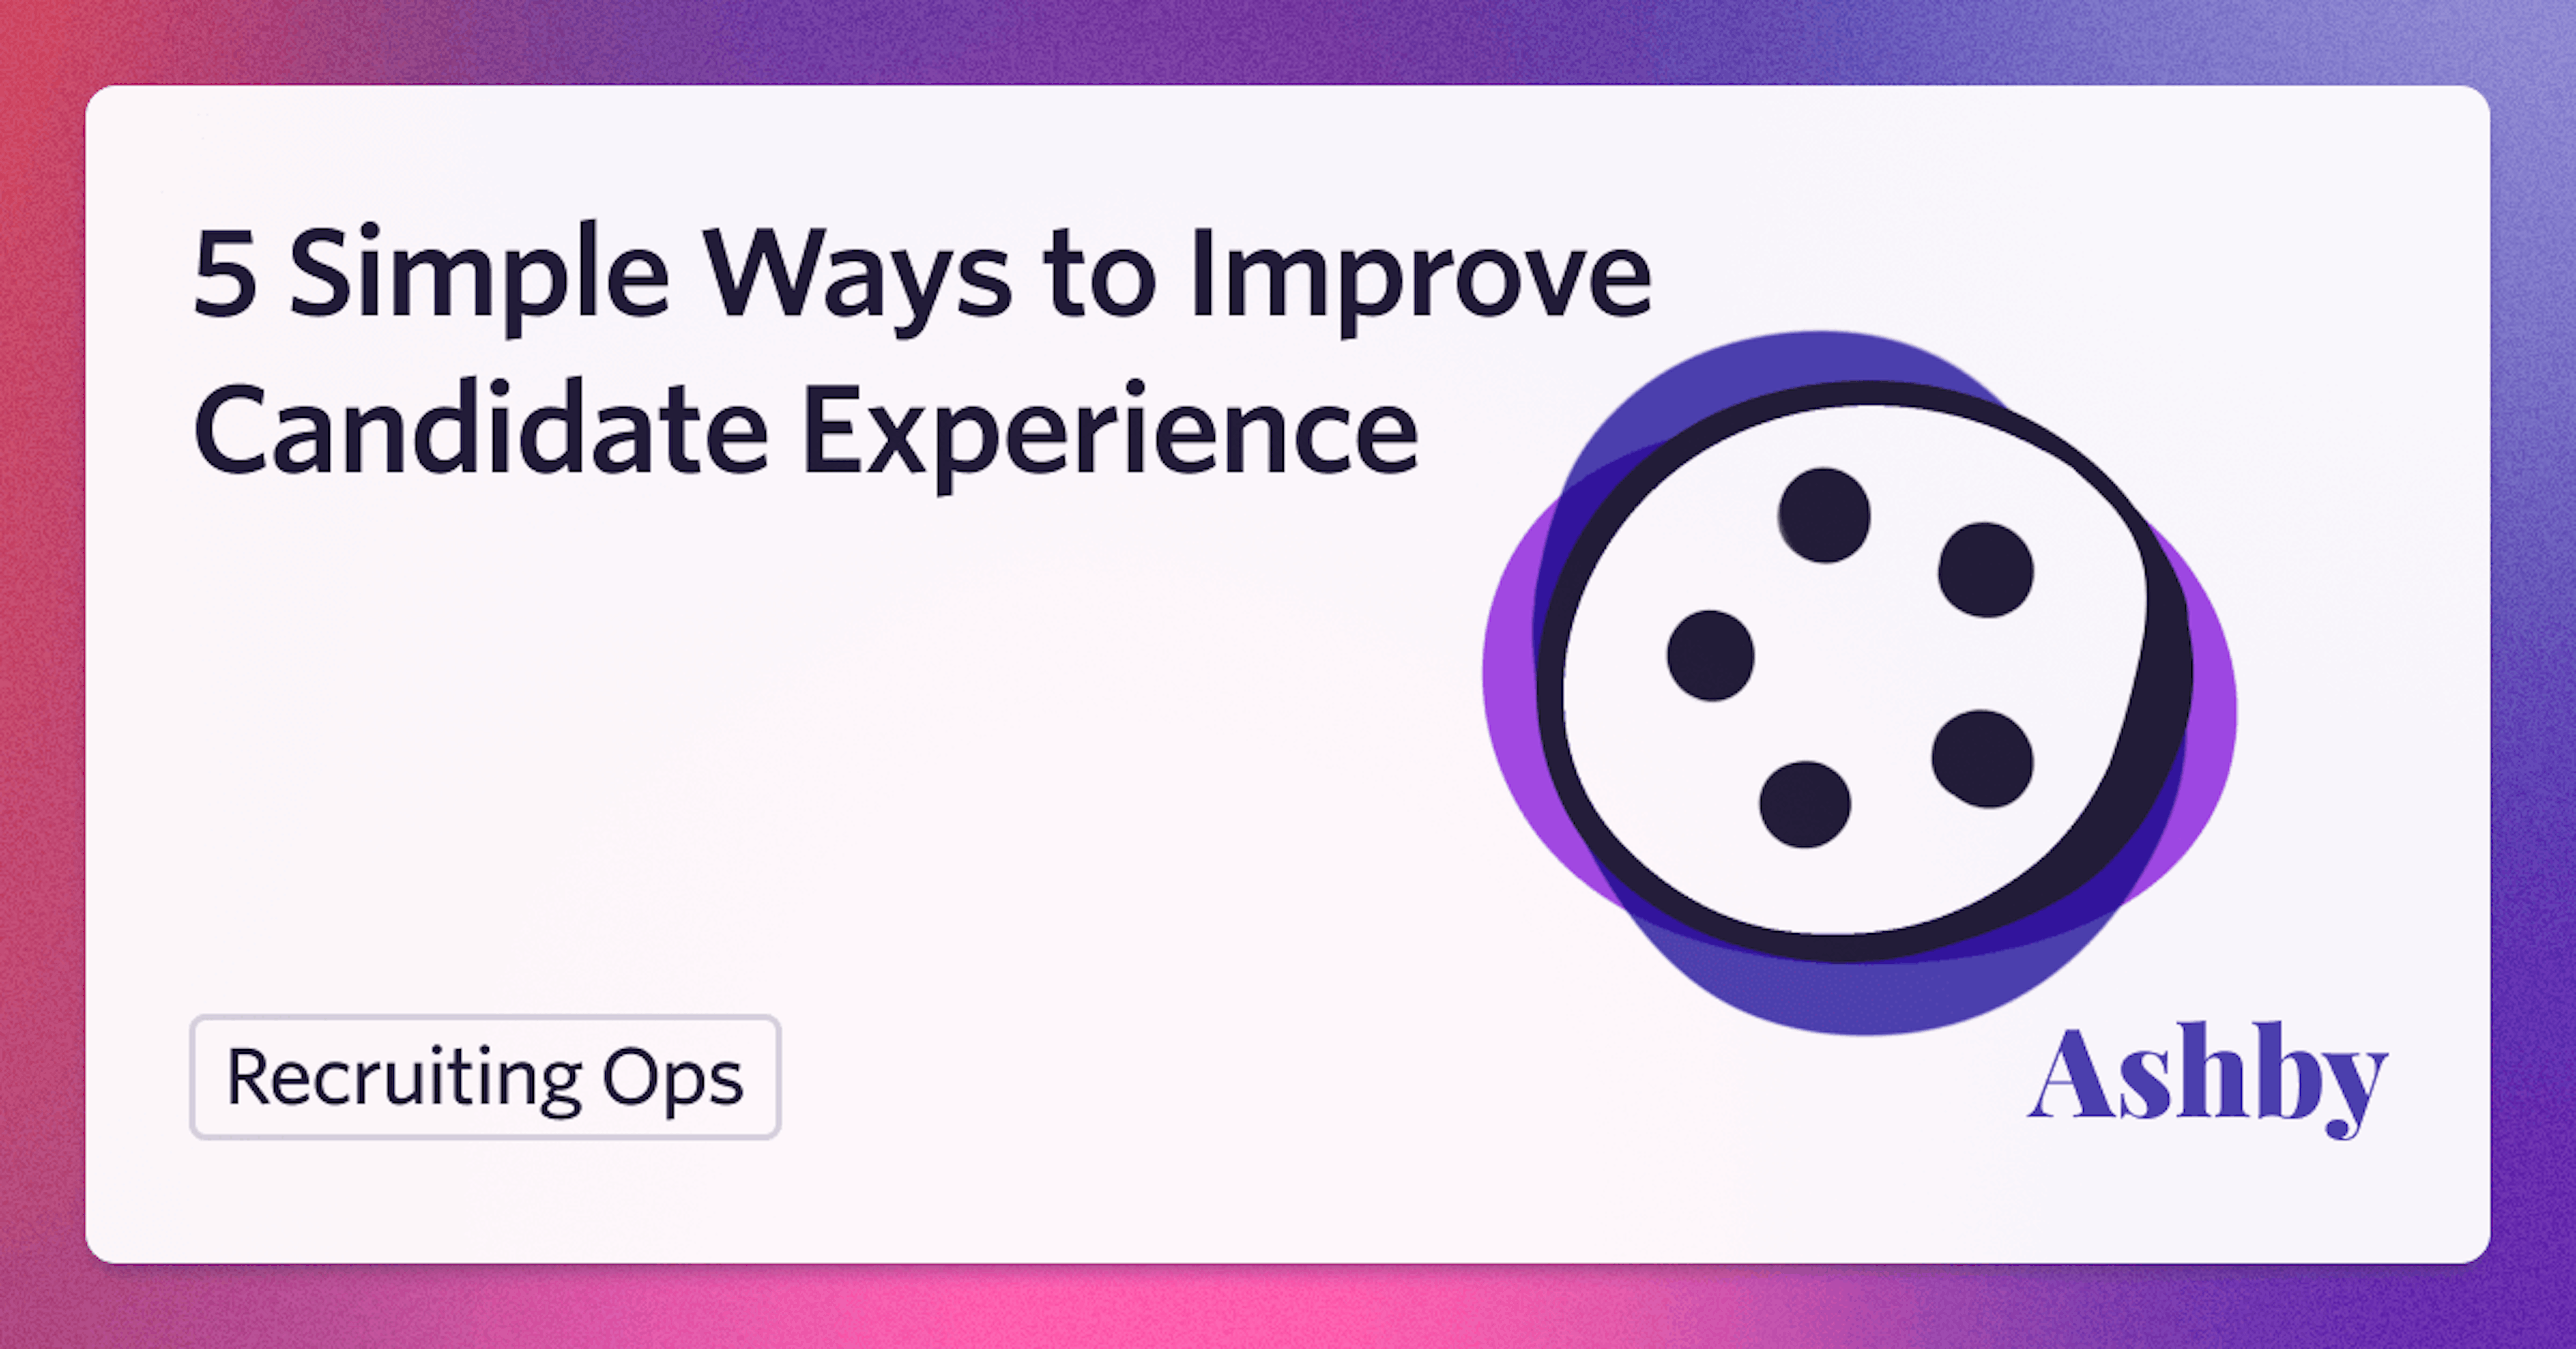 5 Simple Ways to Improve Candidate Experience and Close More Candidates